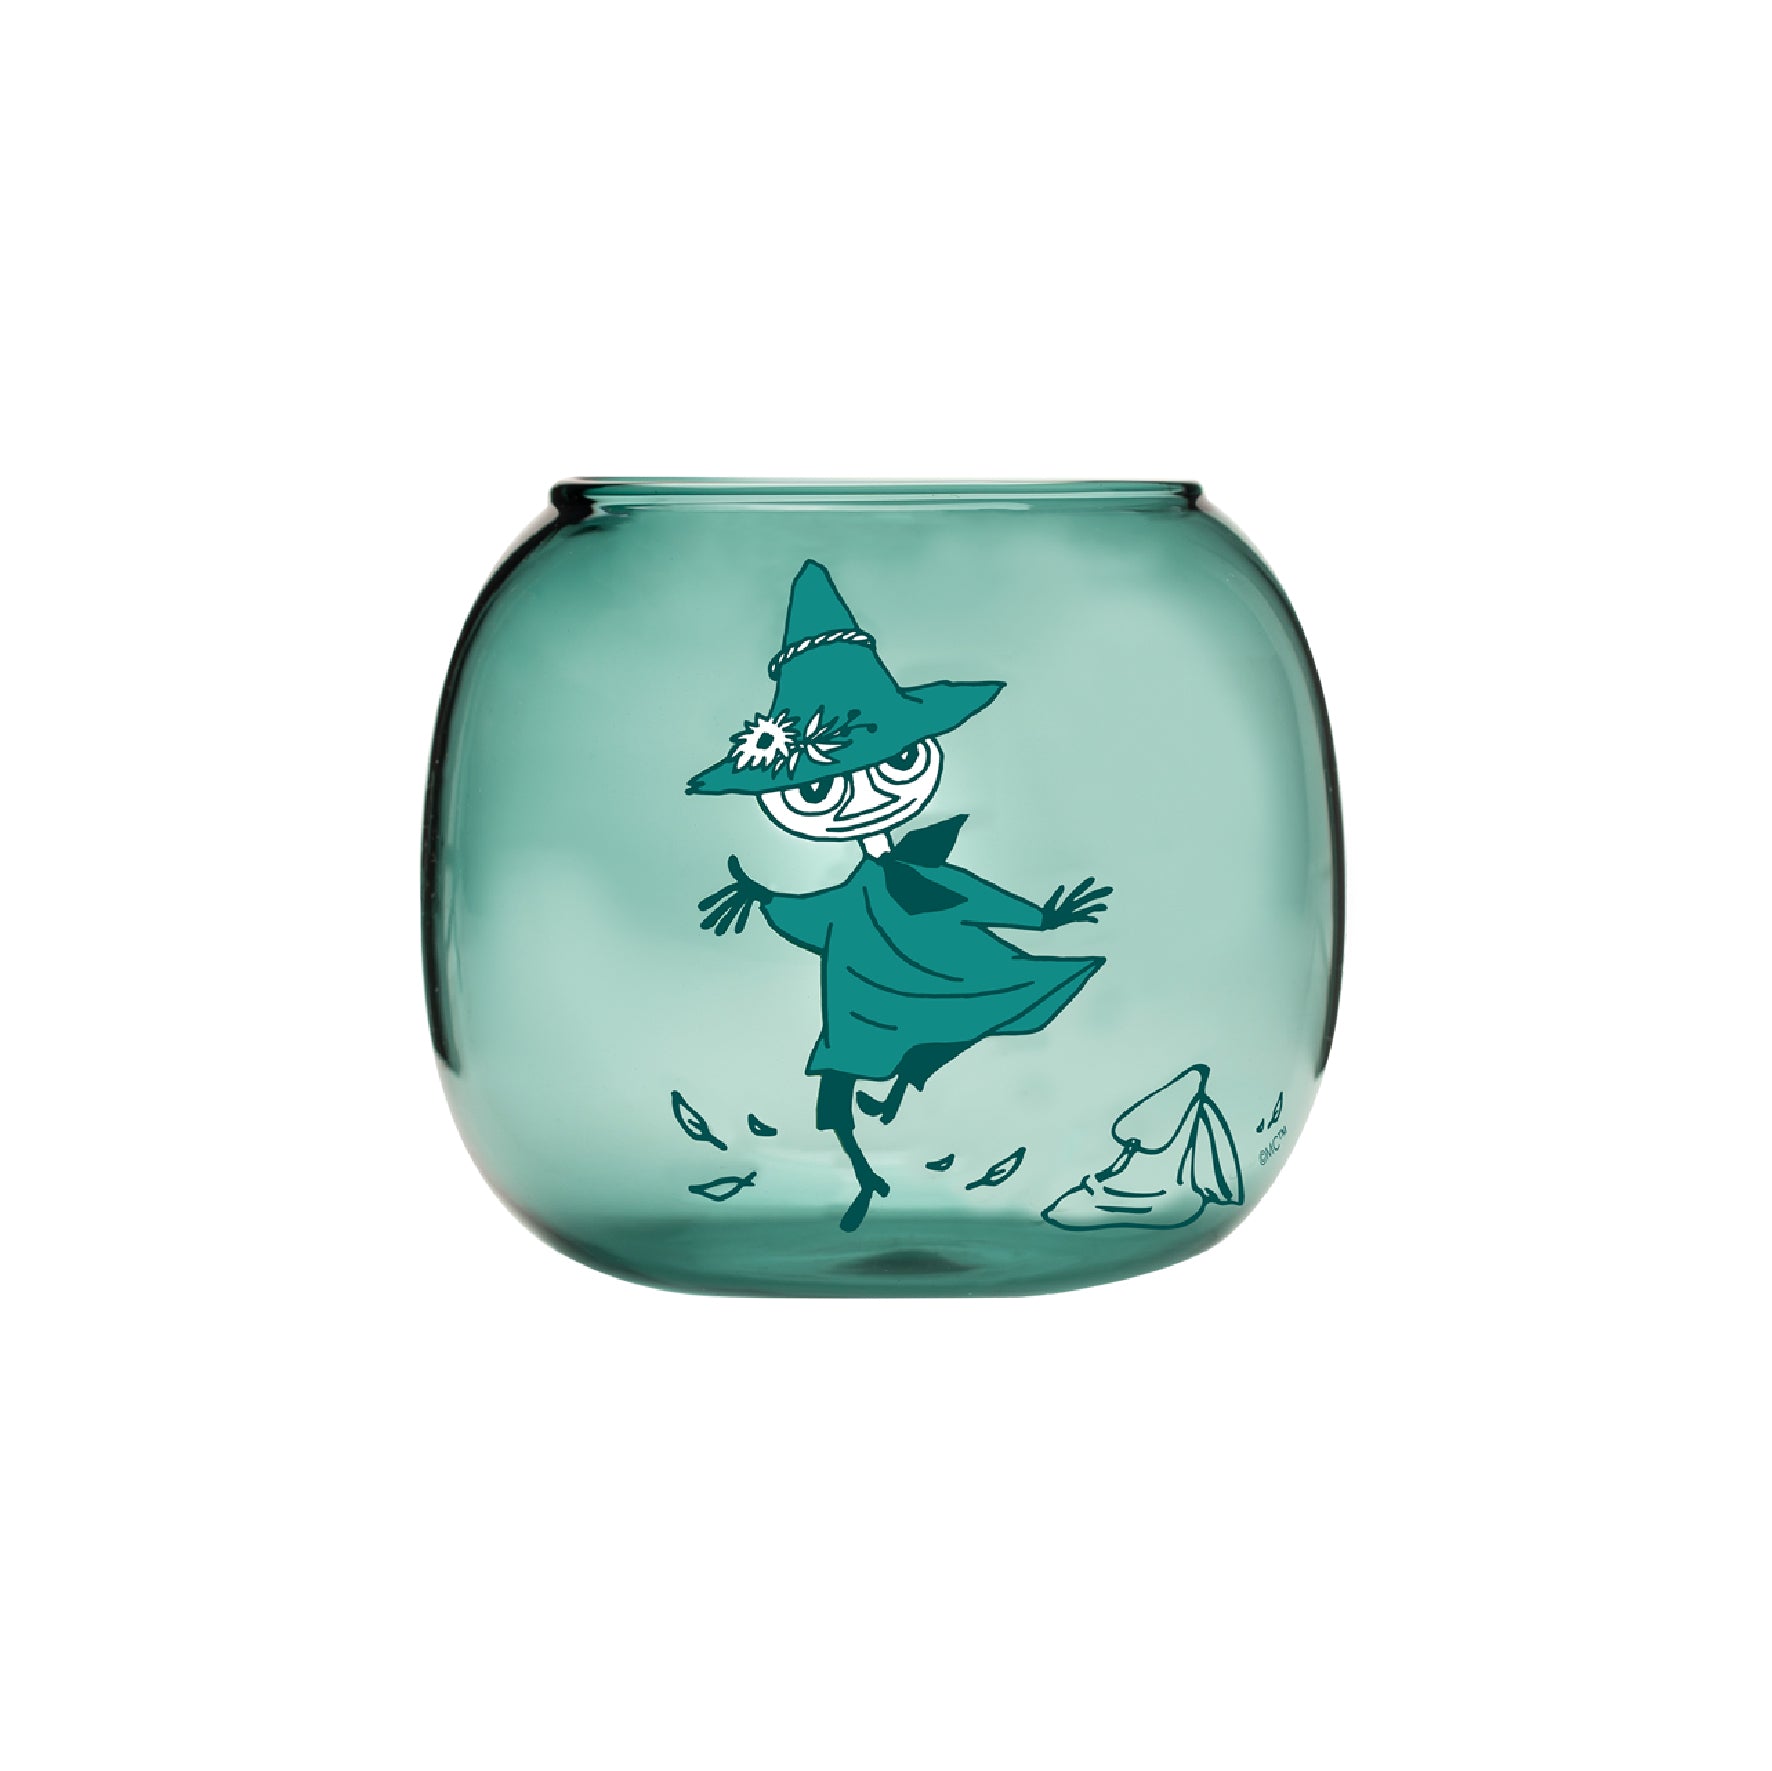 Moomin Candle Holder - Snufkin 多功能小燭台